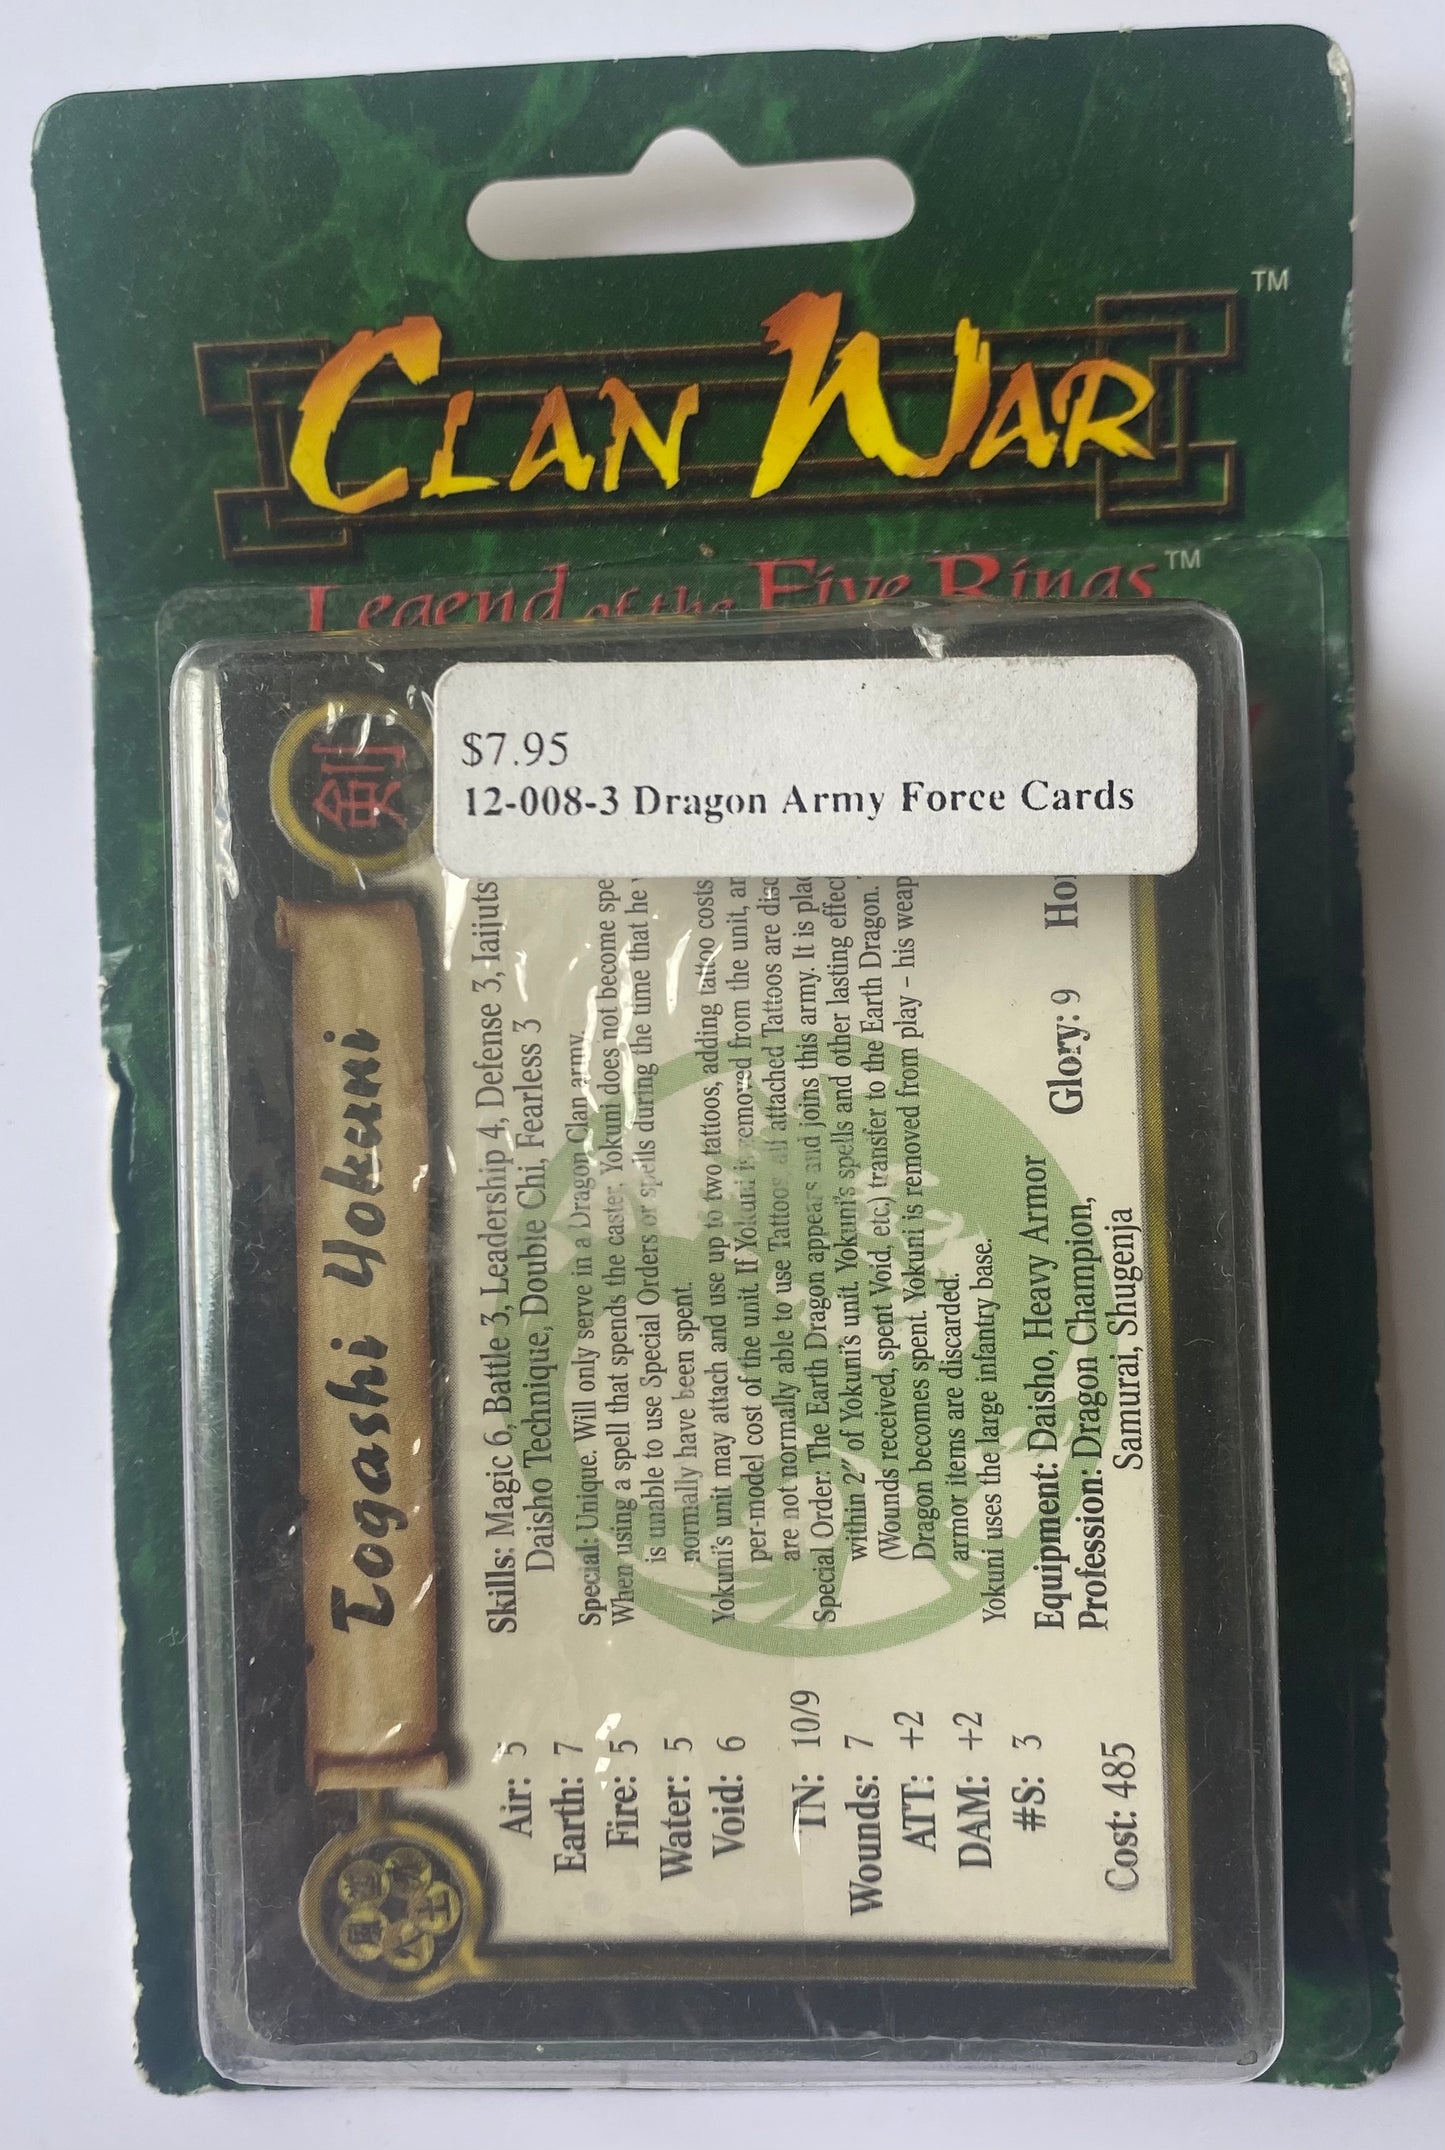 12-008-3 Dragon Army Force Cards